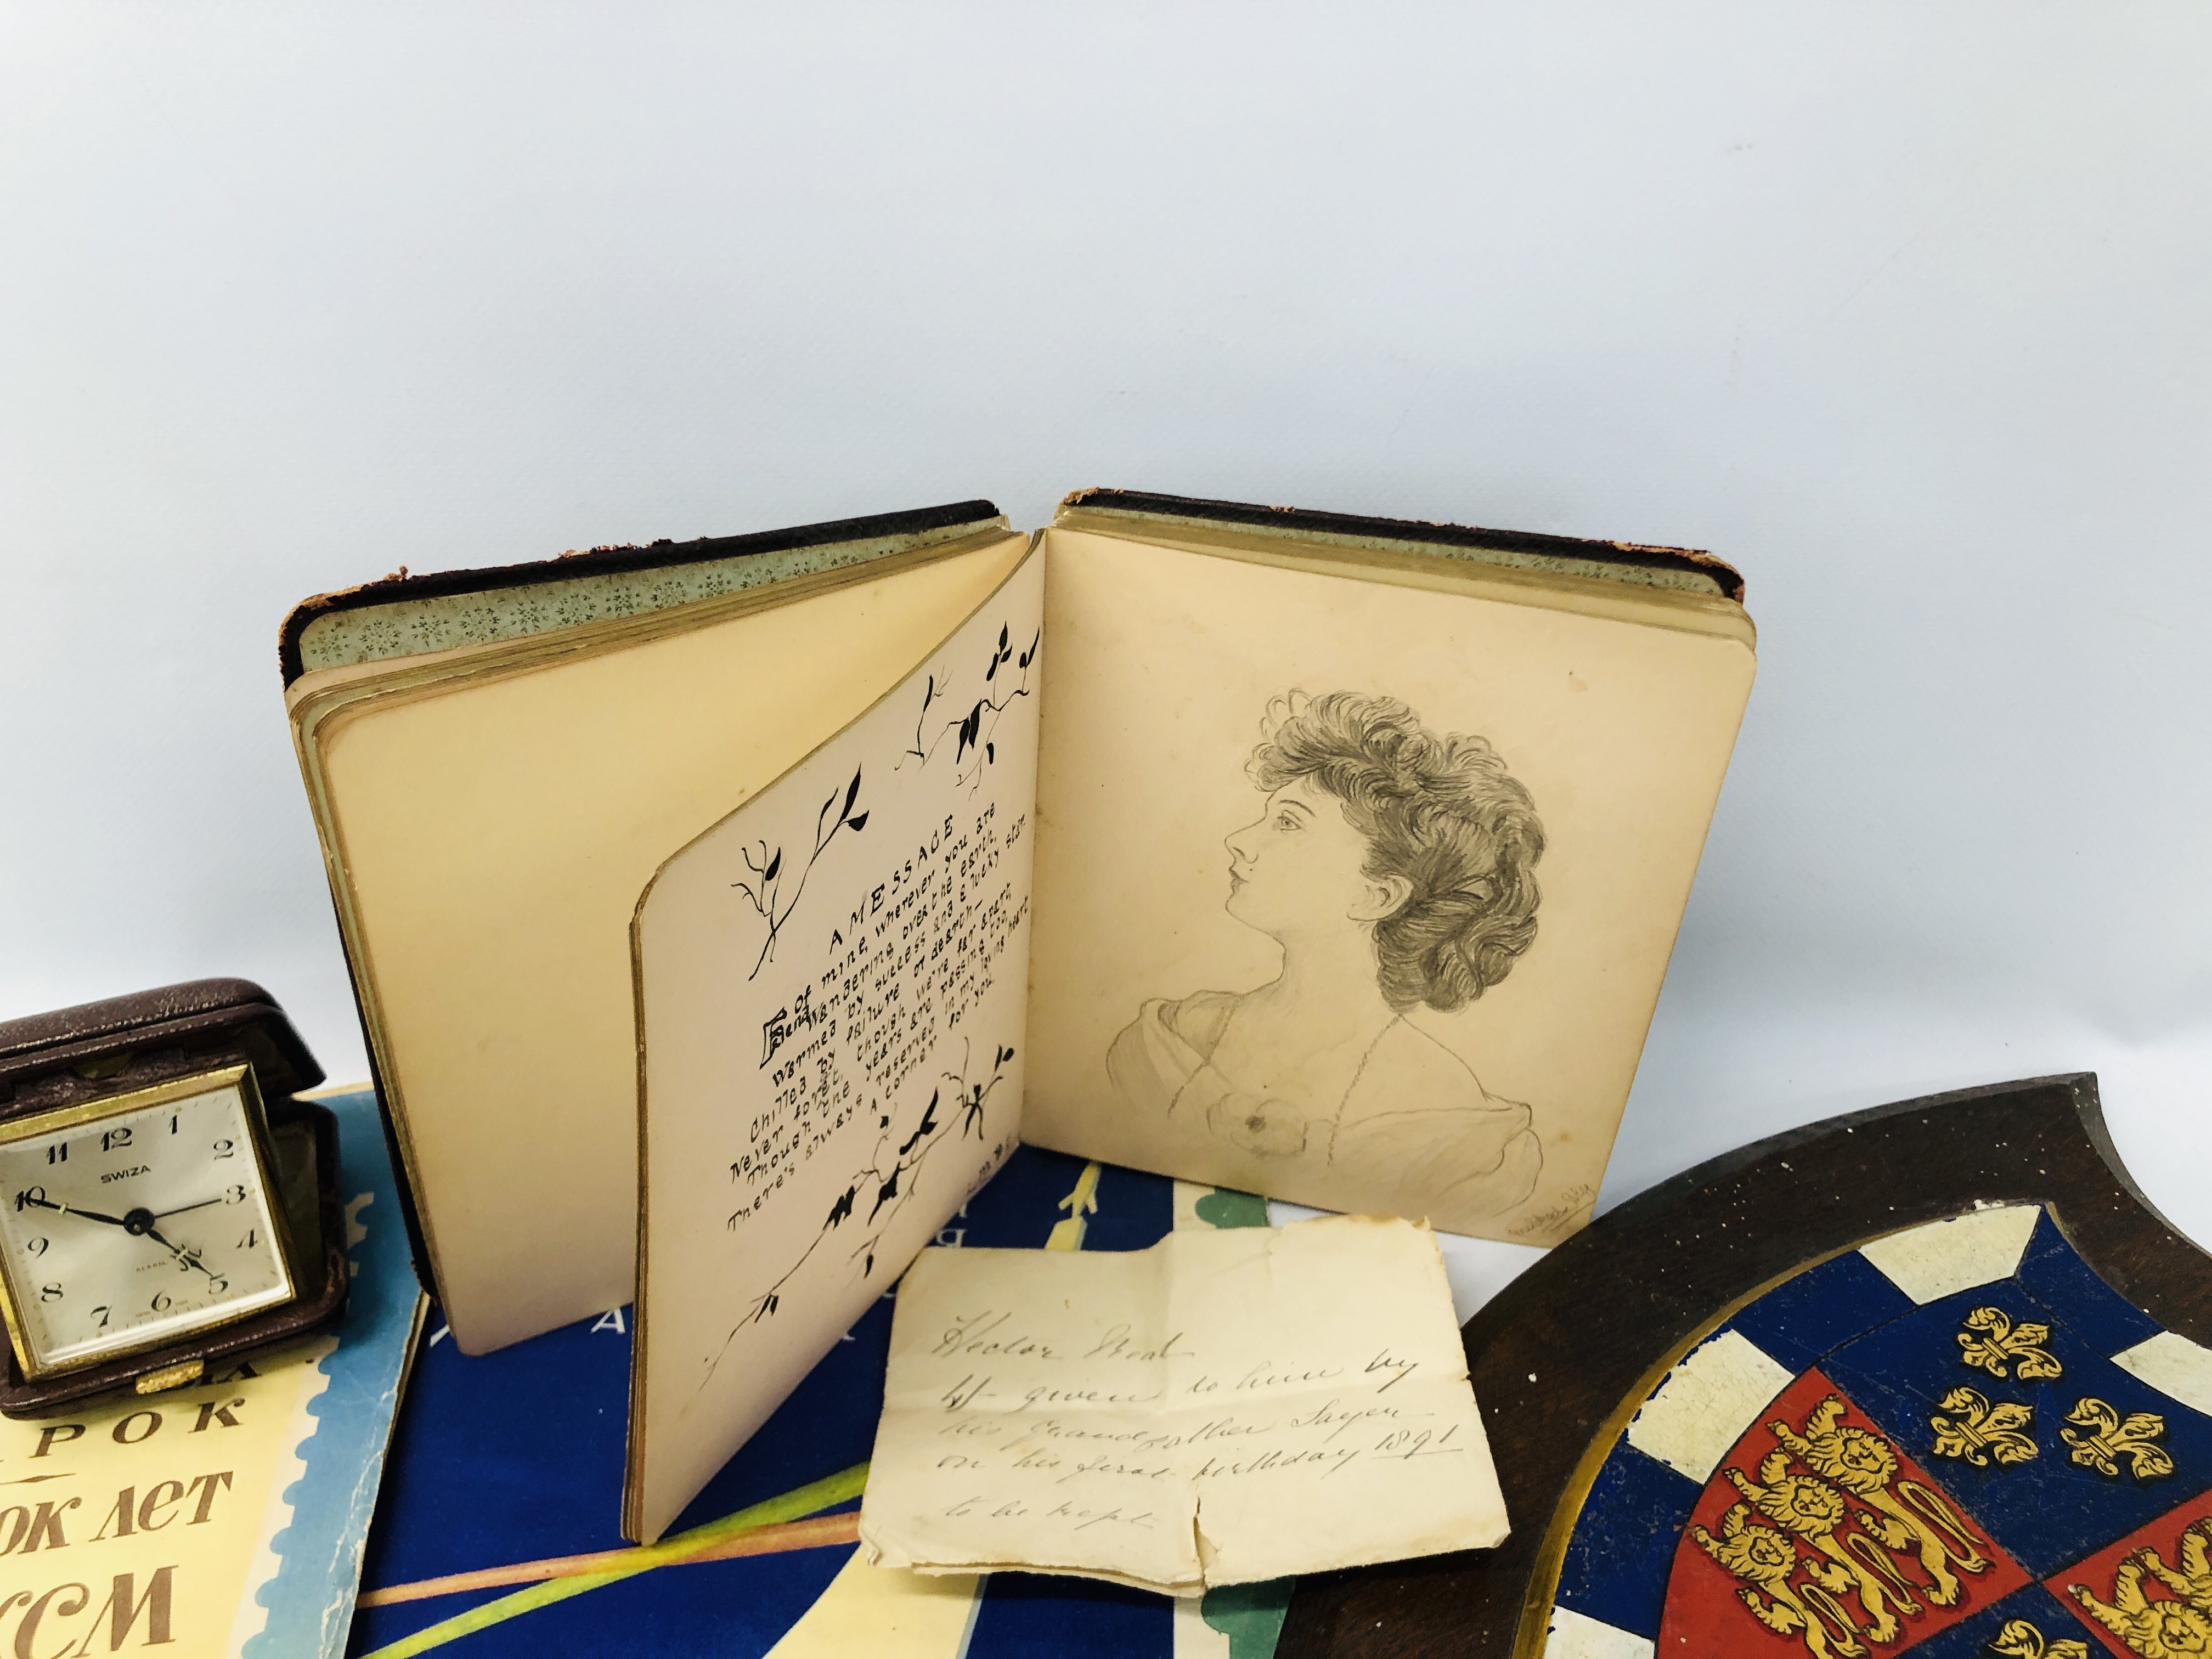 AN ANTIQUE LEATHERED ALBUM CONTAINING HAND WRITTEN VERSE AND SKETCHES C1900, - Image 8 of 13